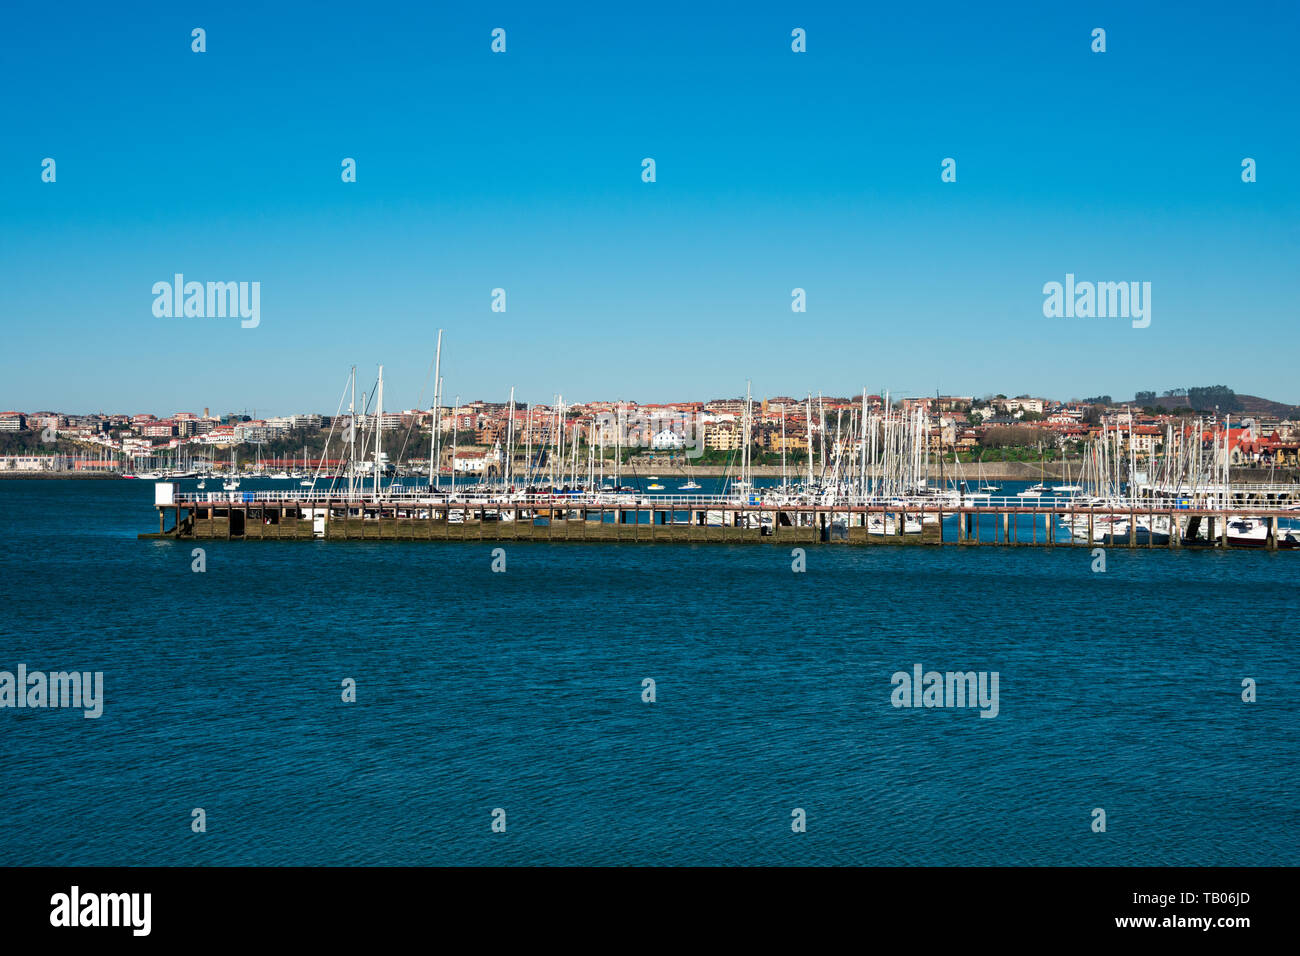 Portugalete, Spain. February 14, 2019. Pier and sailboats, on Nervion river Stock Photo